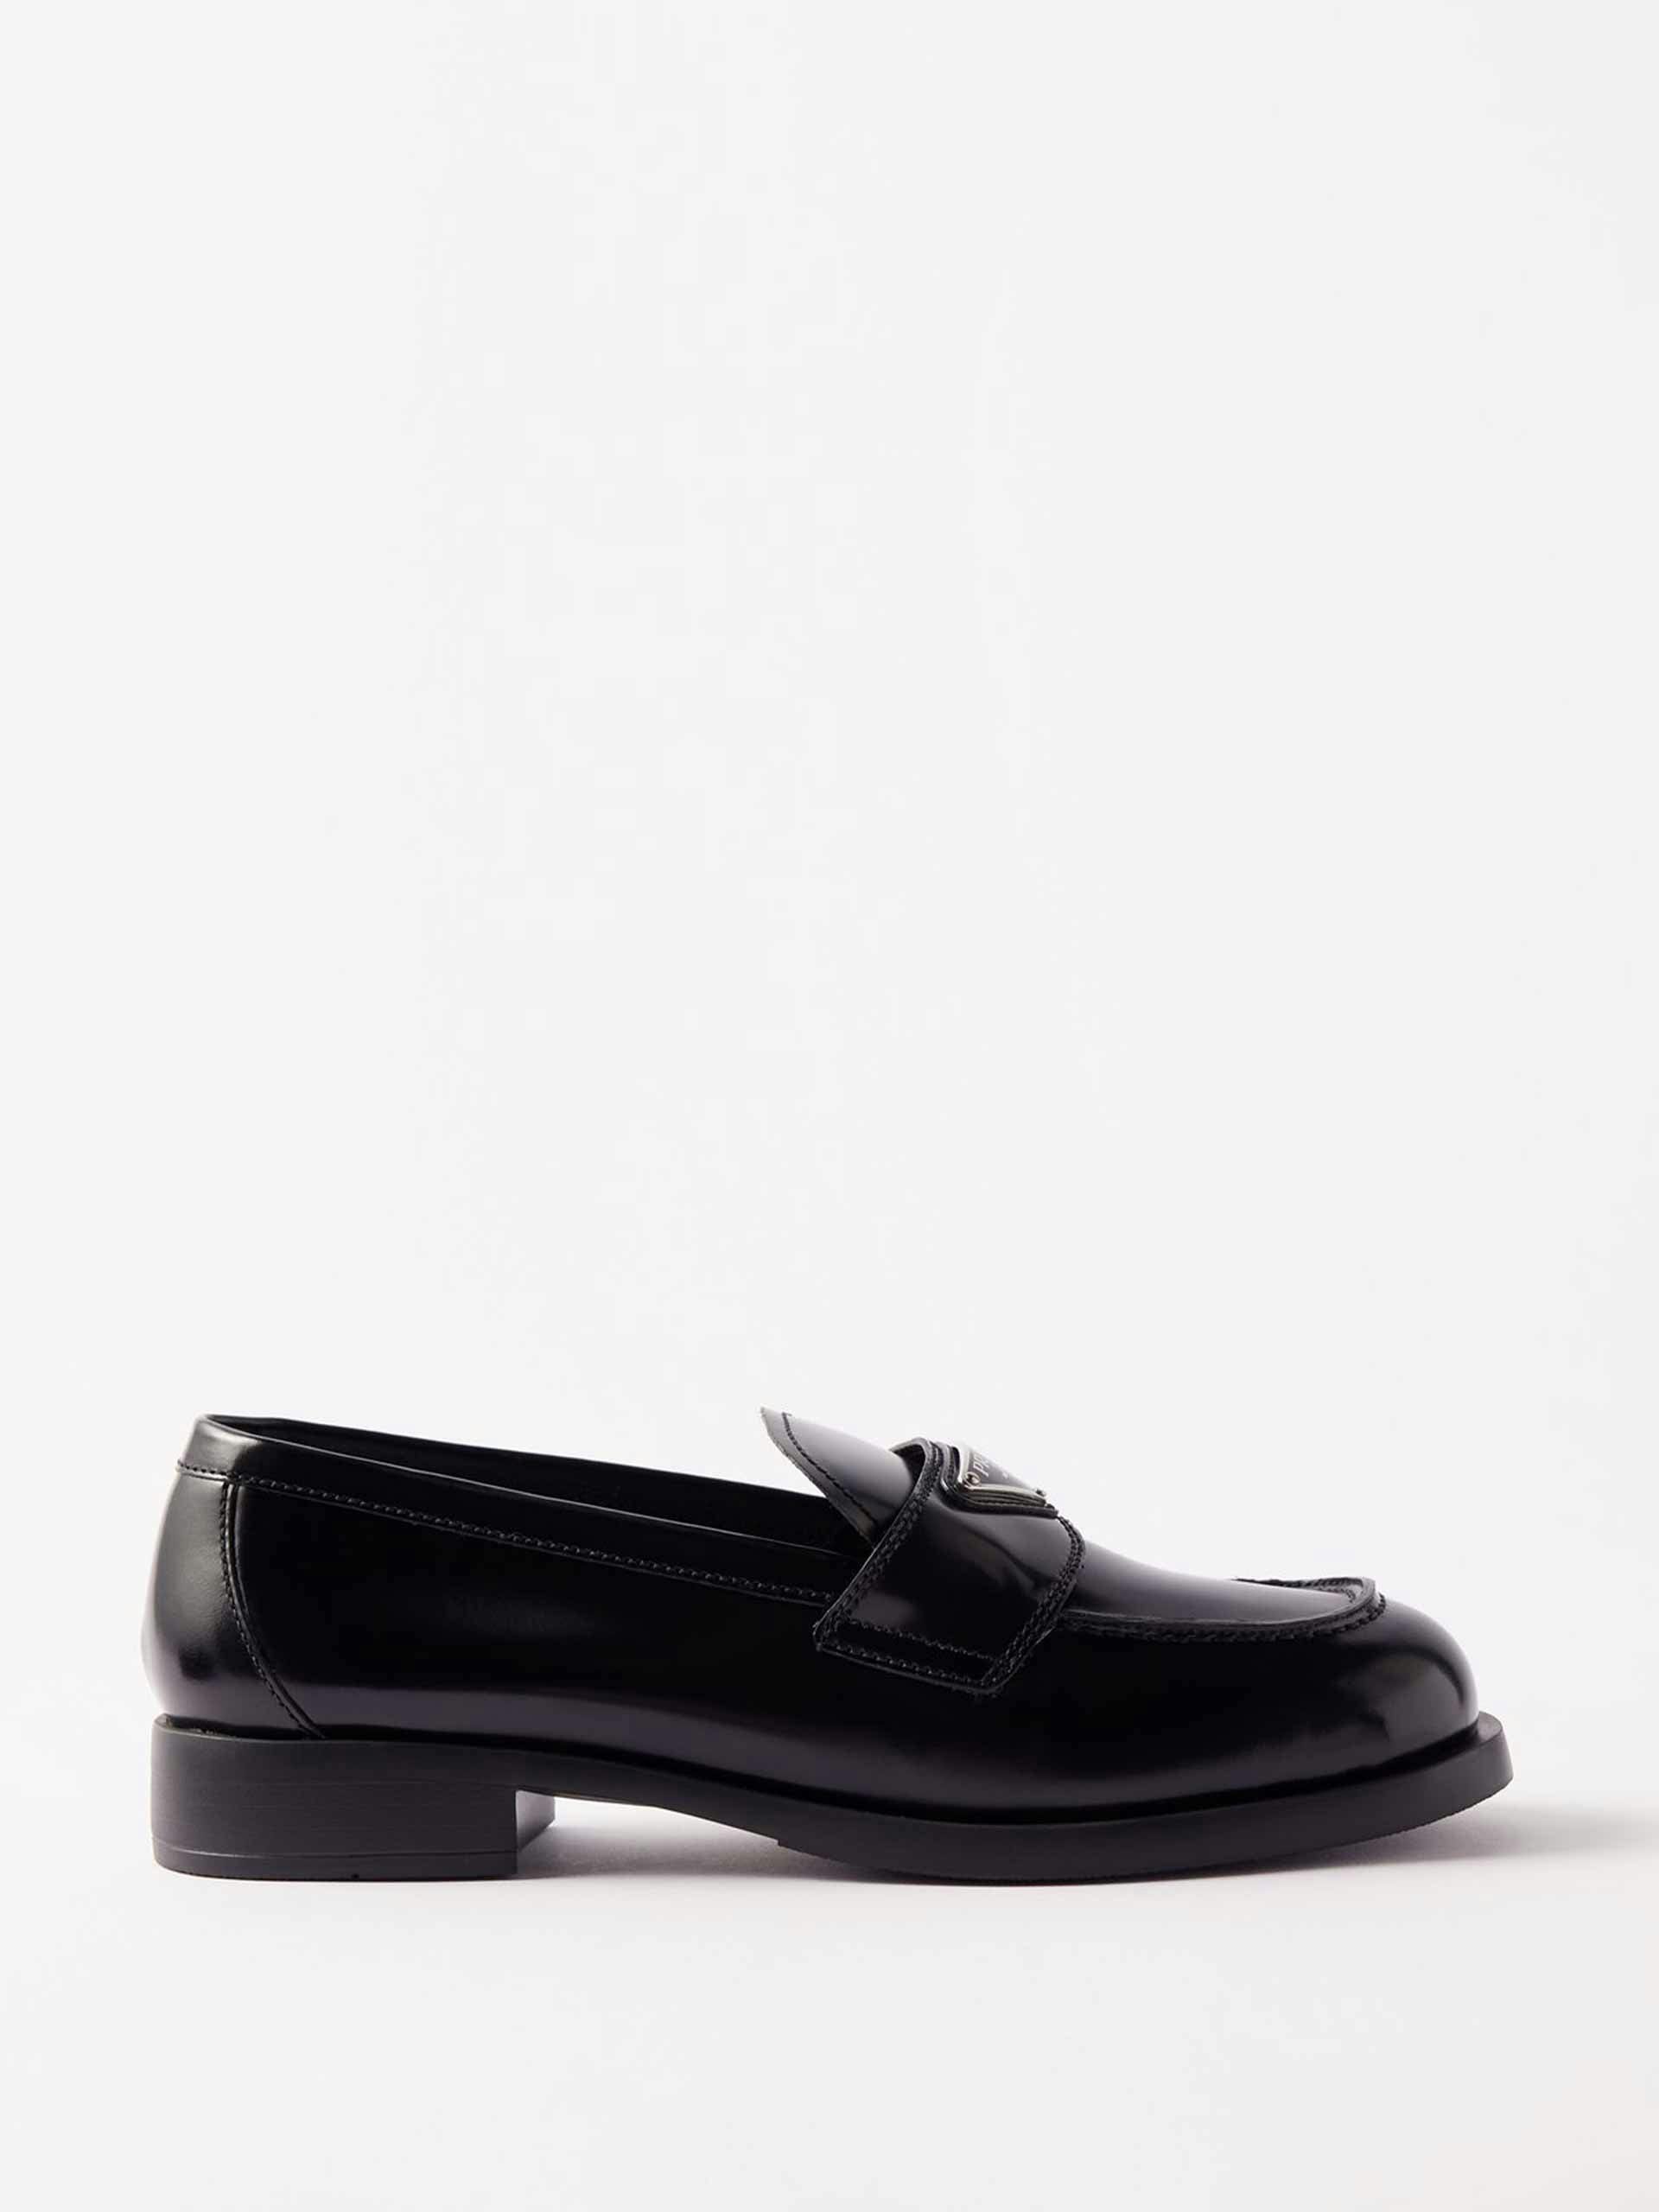 Black leather loafers